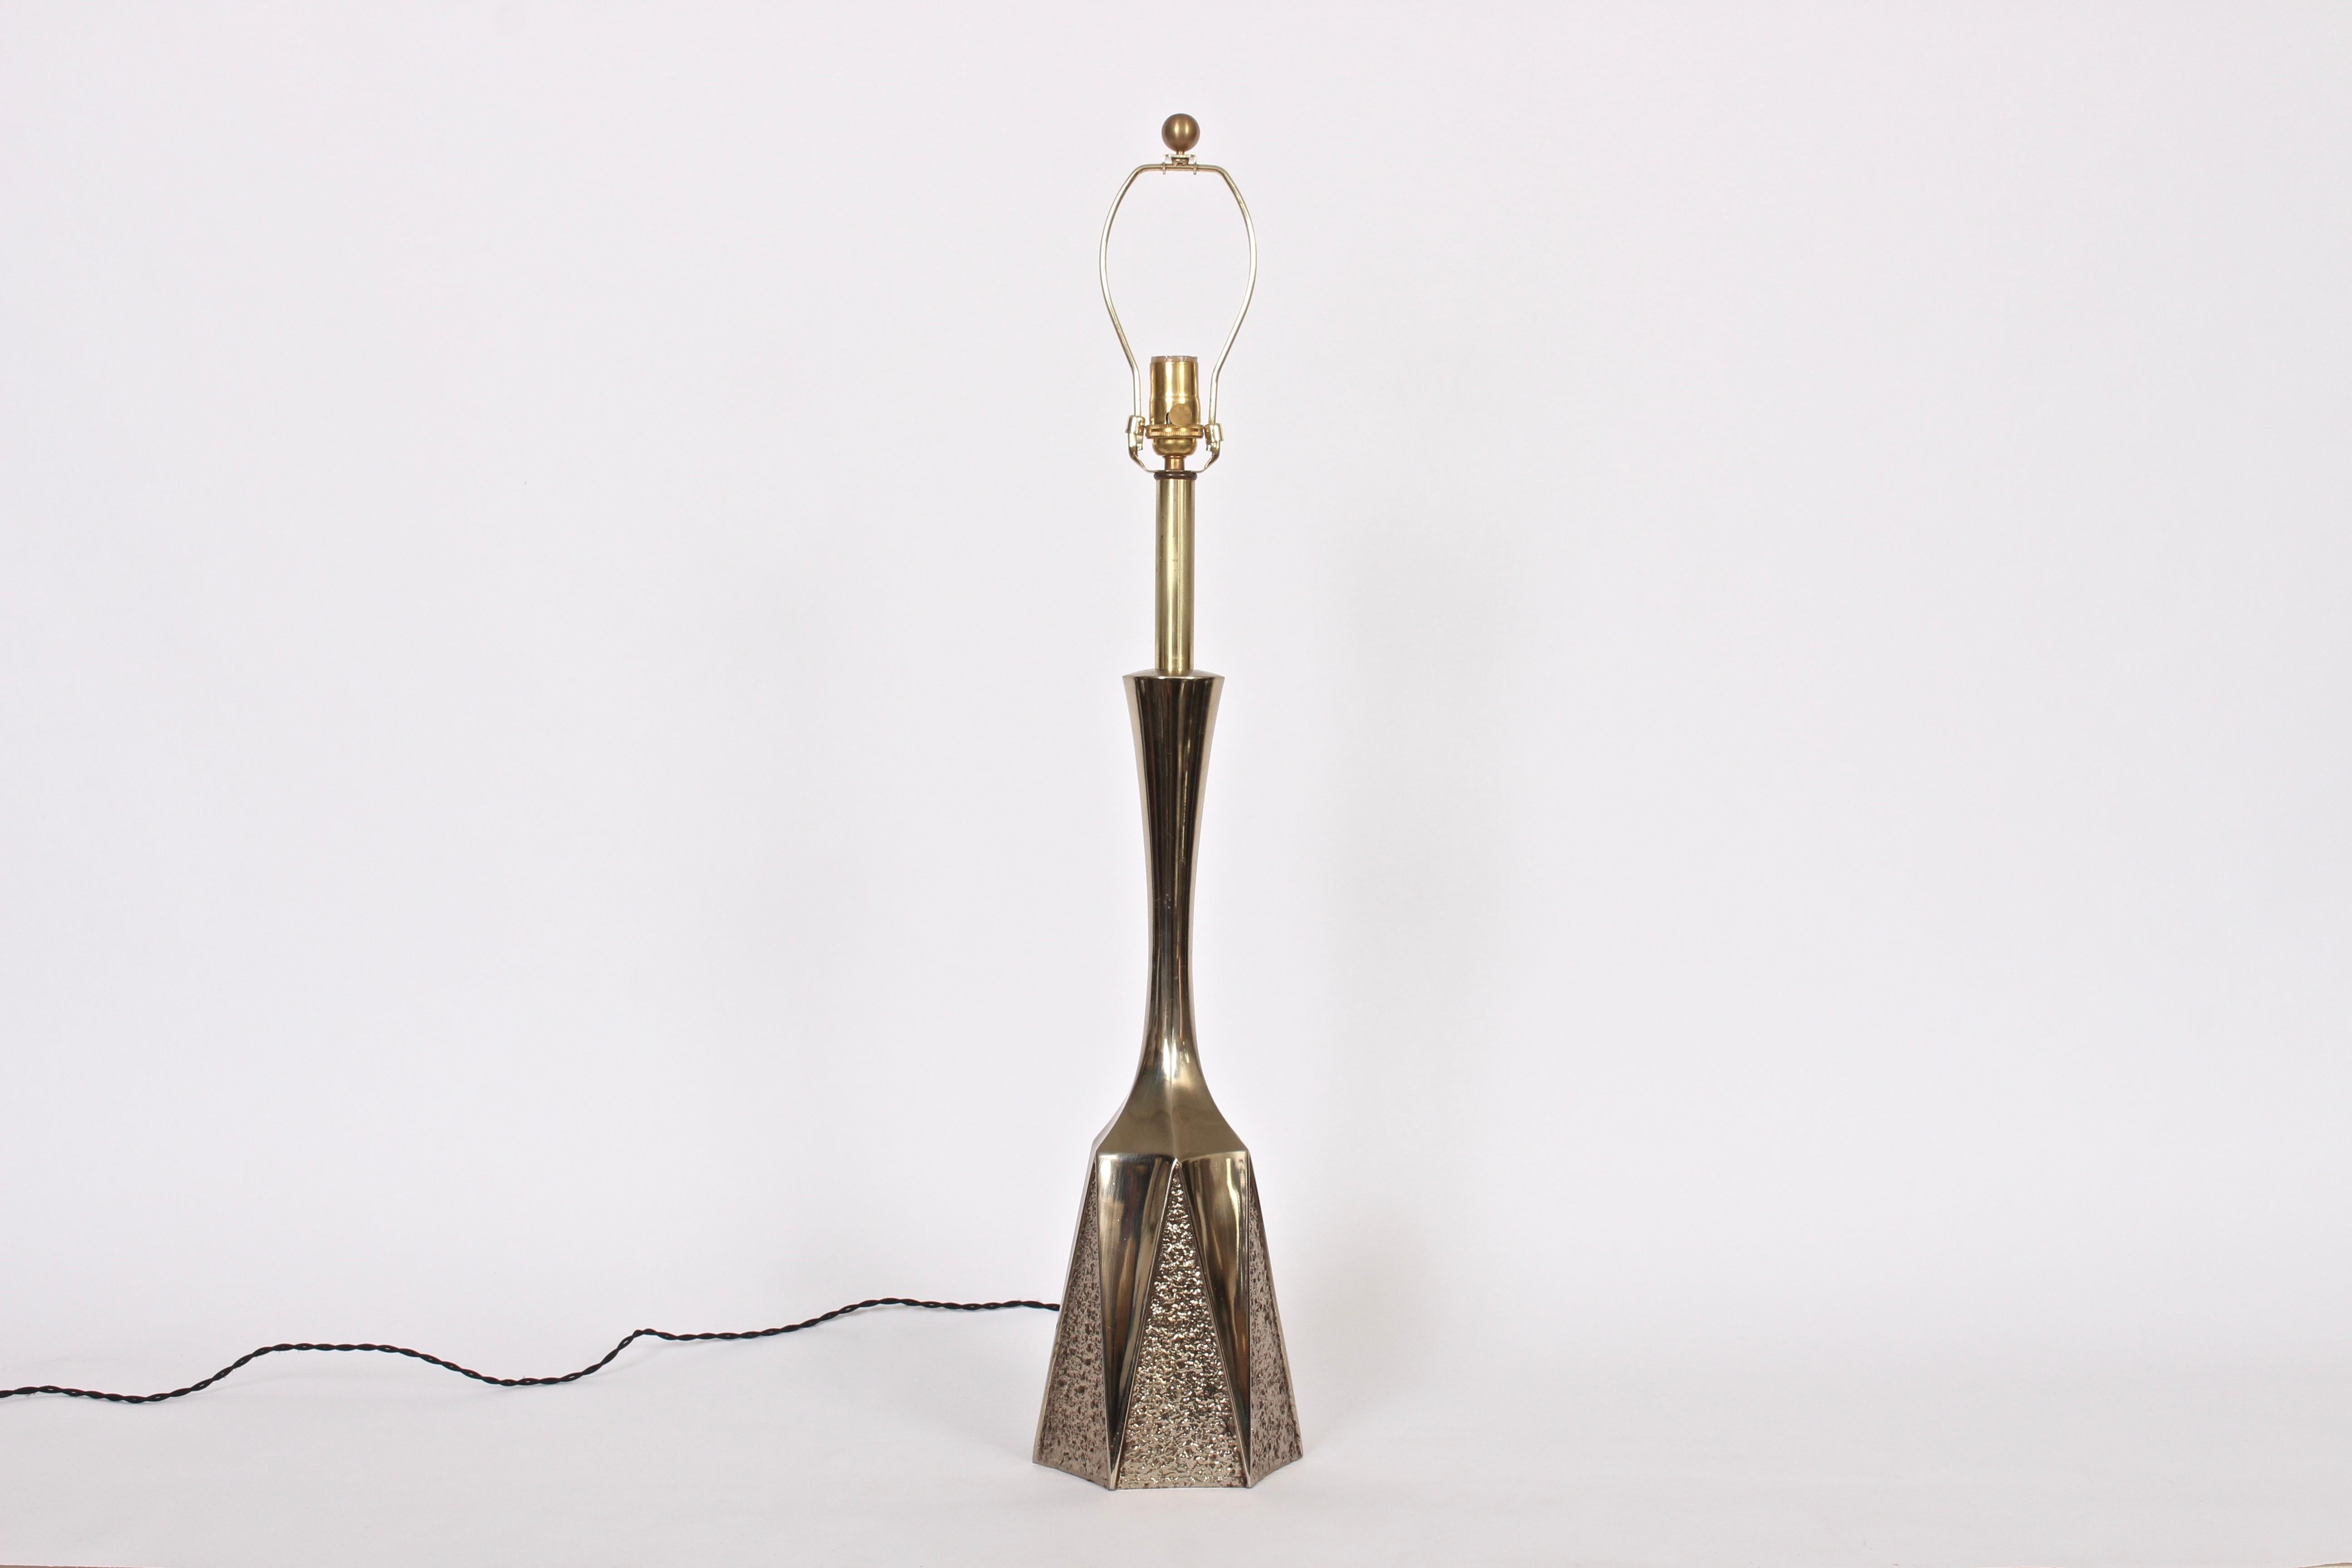 Laurel Lamp Co. hexagonal brass table lamp by Richard Barr and Harold Weiss, 1960's. Featuring a six sided sculpted Brass form, polished and textured triangular brass decoration, smooth column and neck, in manner of Maurizio Tempestini. Nice, heavy